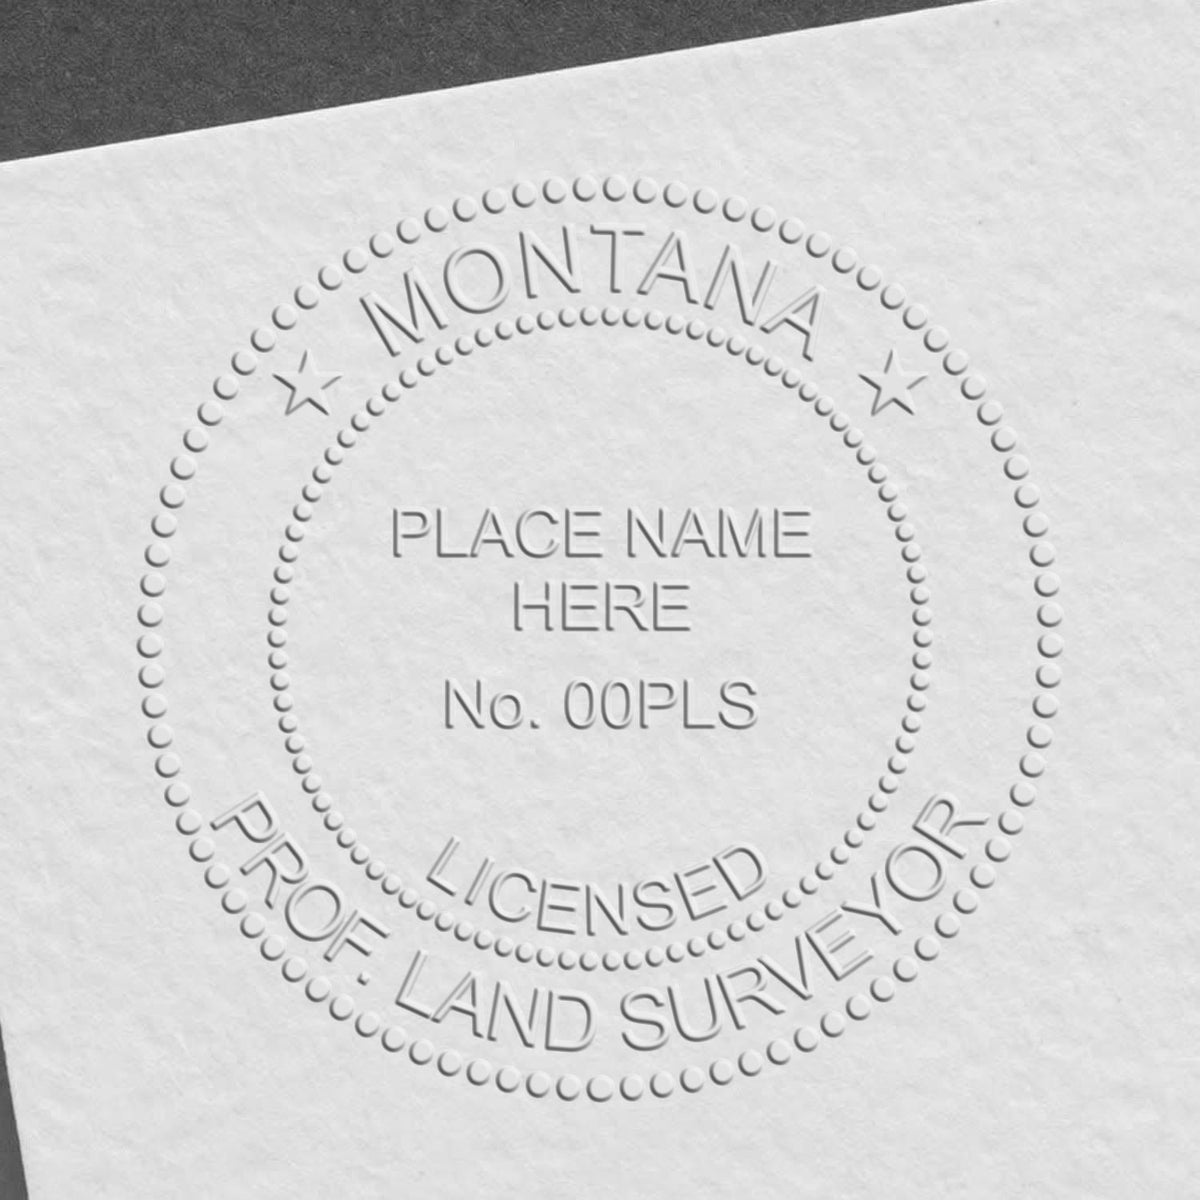 Another Example of a stamped impression of the Heavy Duty Cast Iron Montana Land Surveyor Seal Embosser on a piece of office paper.